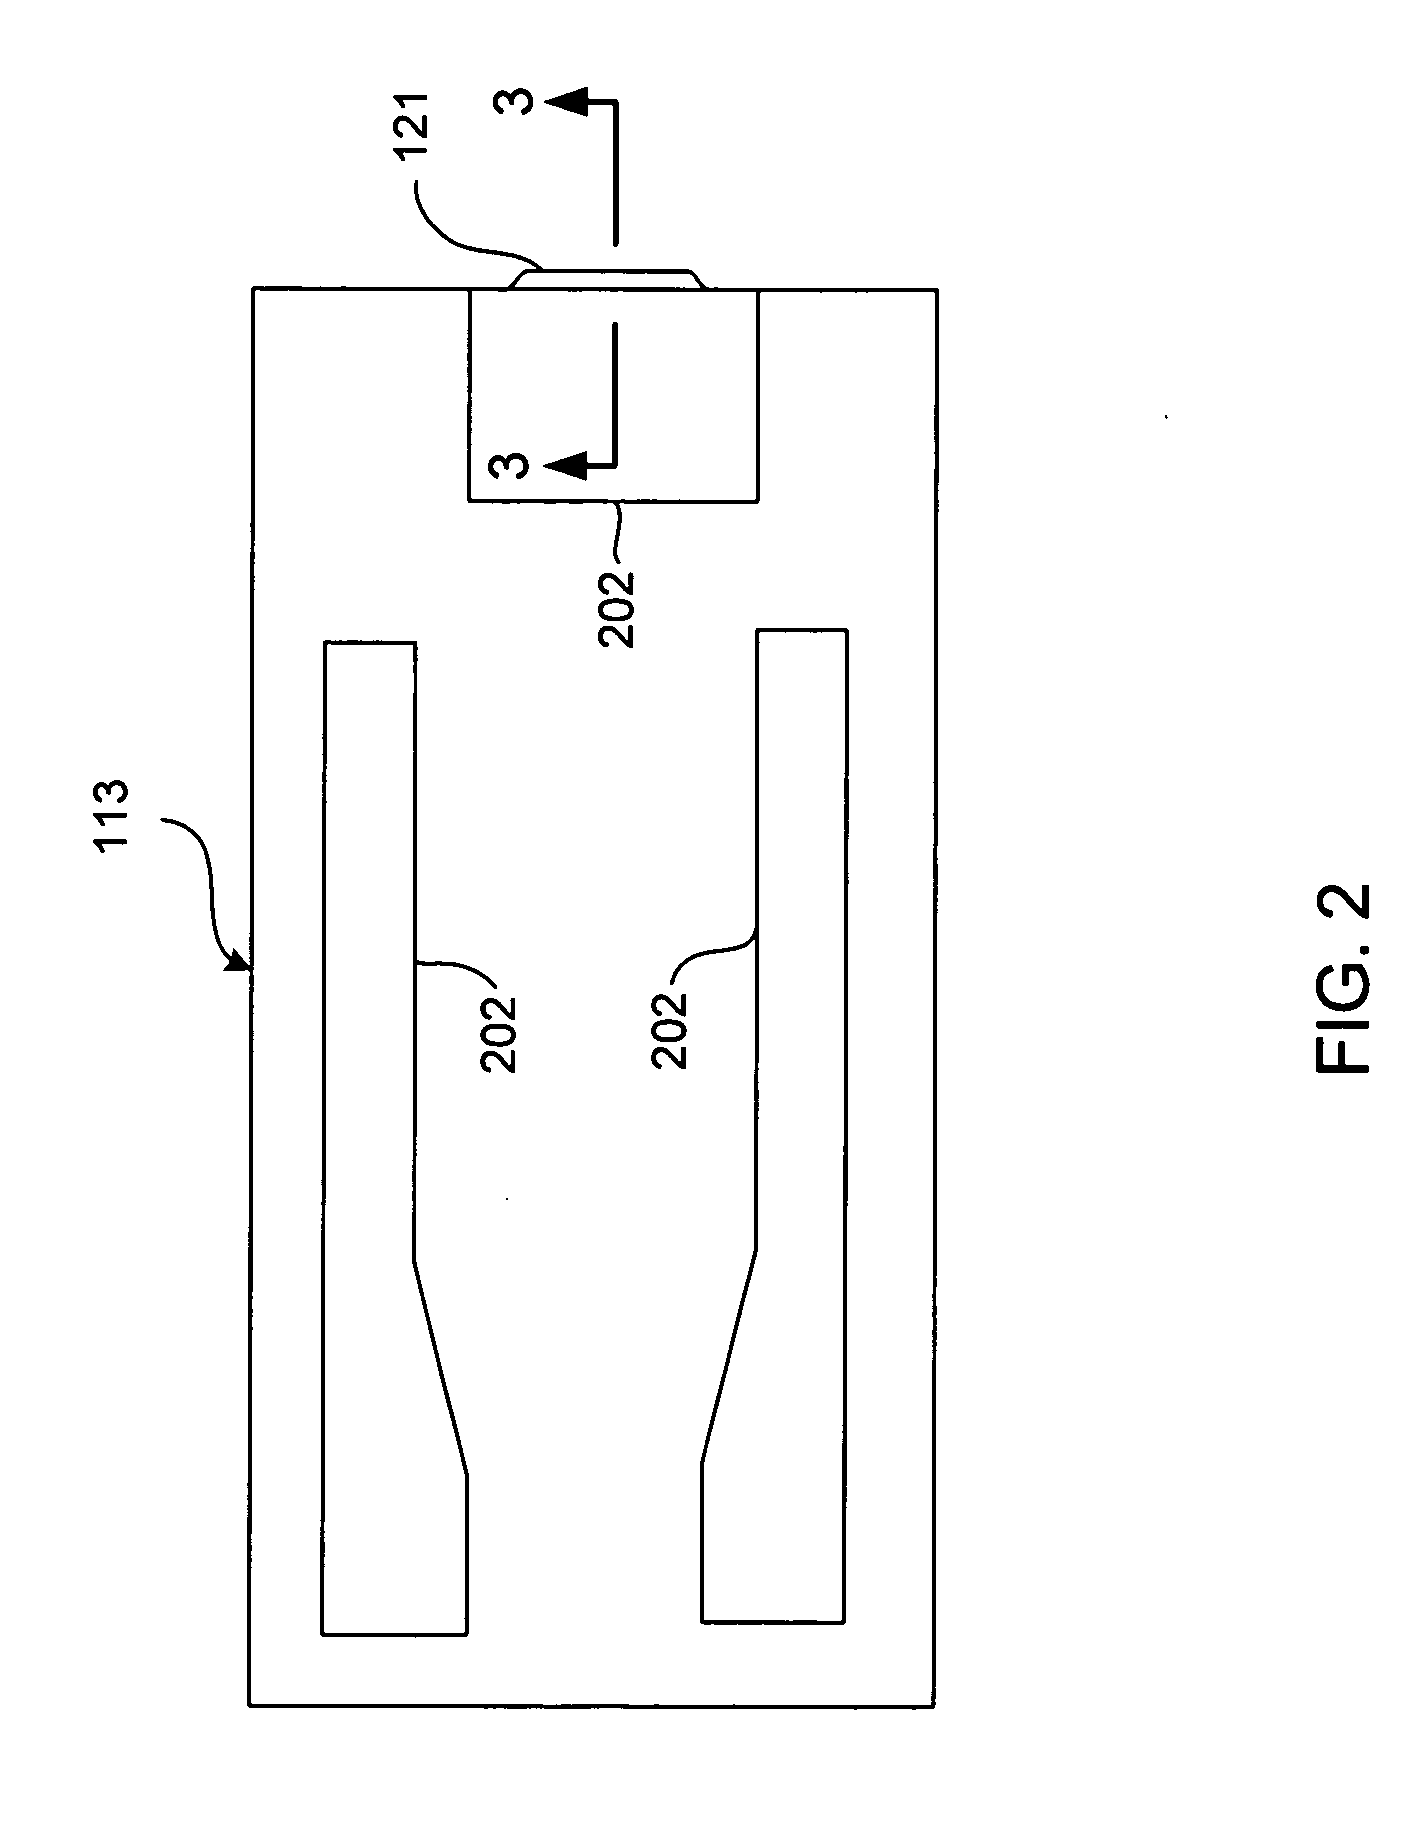 Magnetic write head employing multiple magnetomotive force (MMF) sources